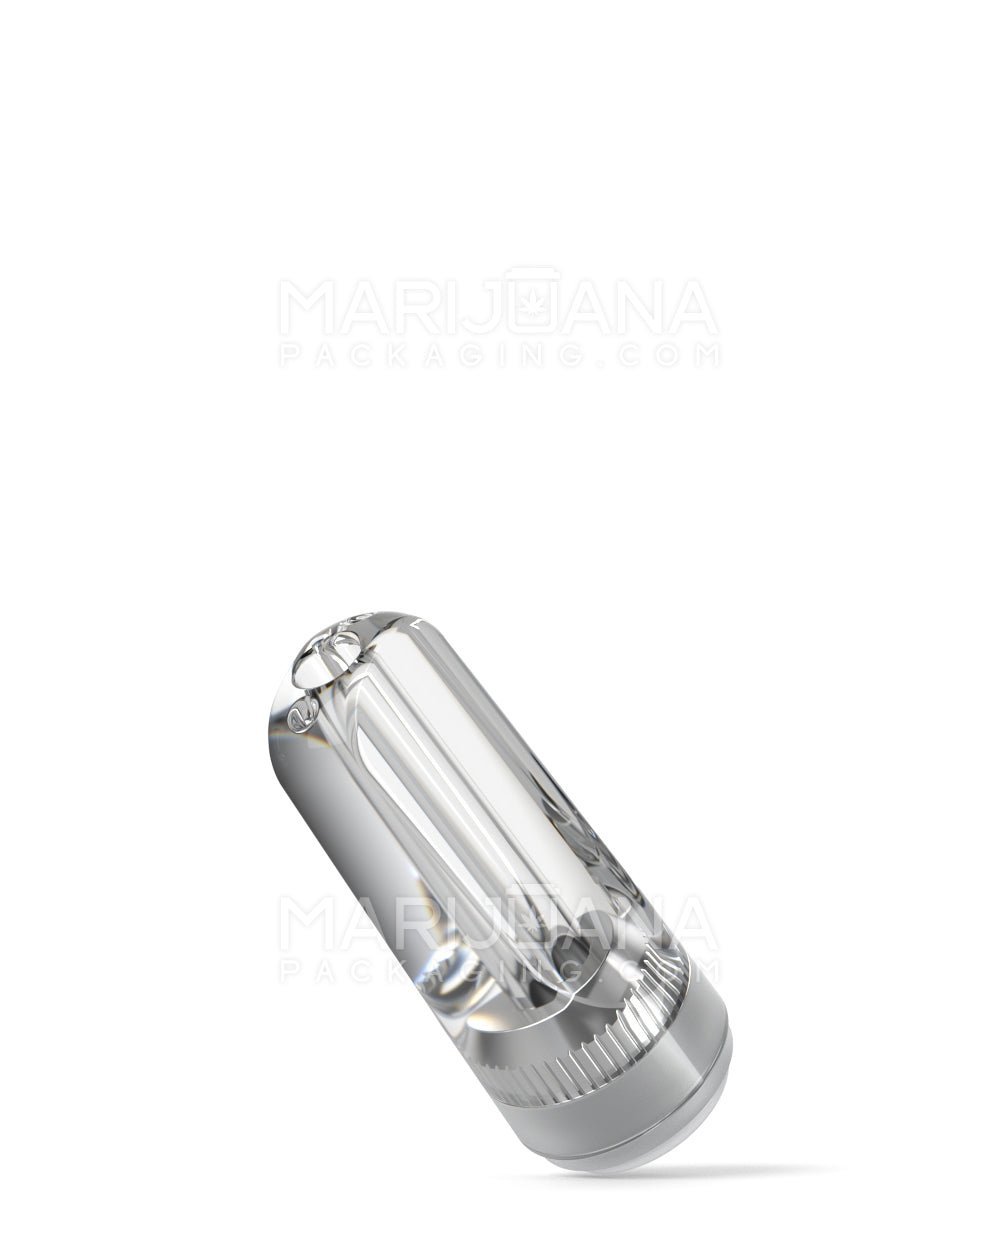 RAE | Flat Vape Mouthpiece for Screw On Plastic Cartridges | Clear Plastic - Screw On - 100 Count - 4